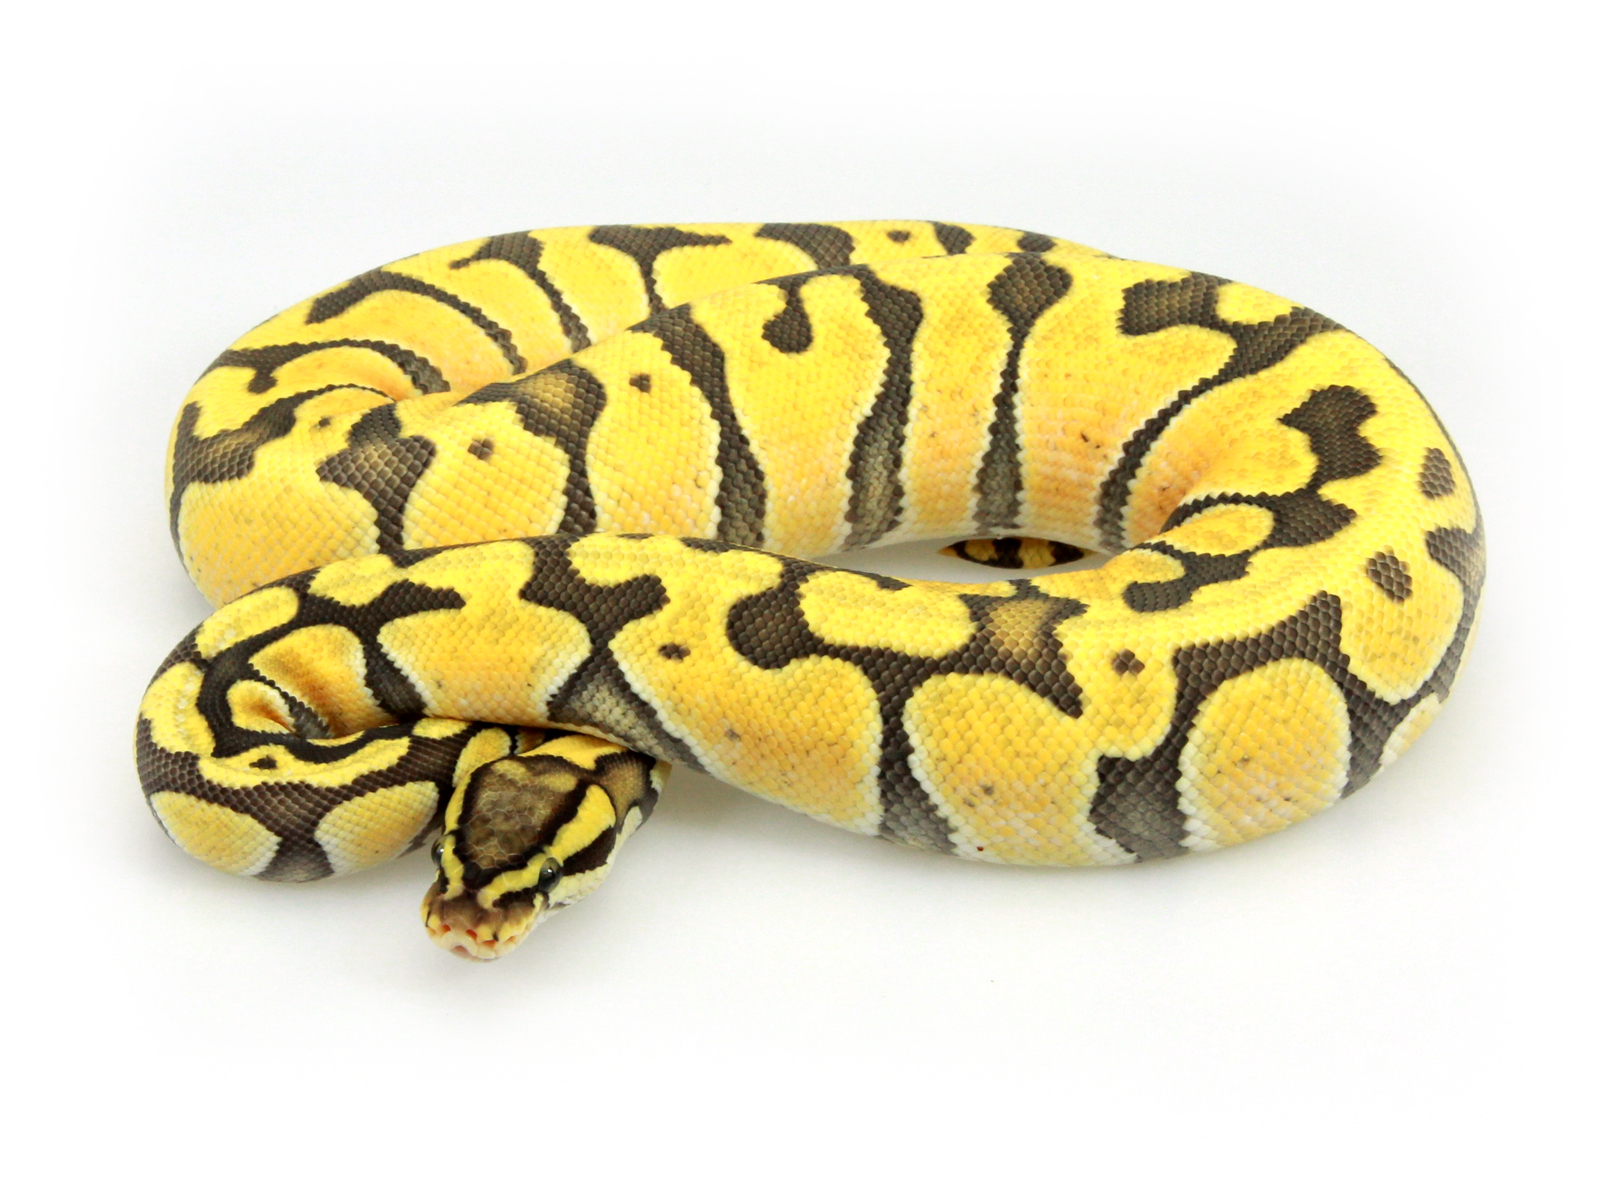 Gallery of Pastel Ghost Ball Python.